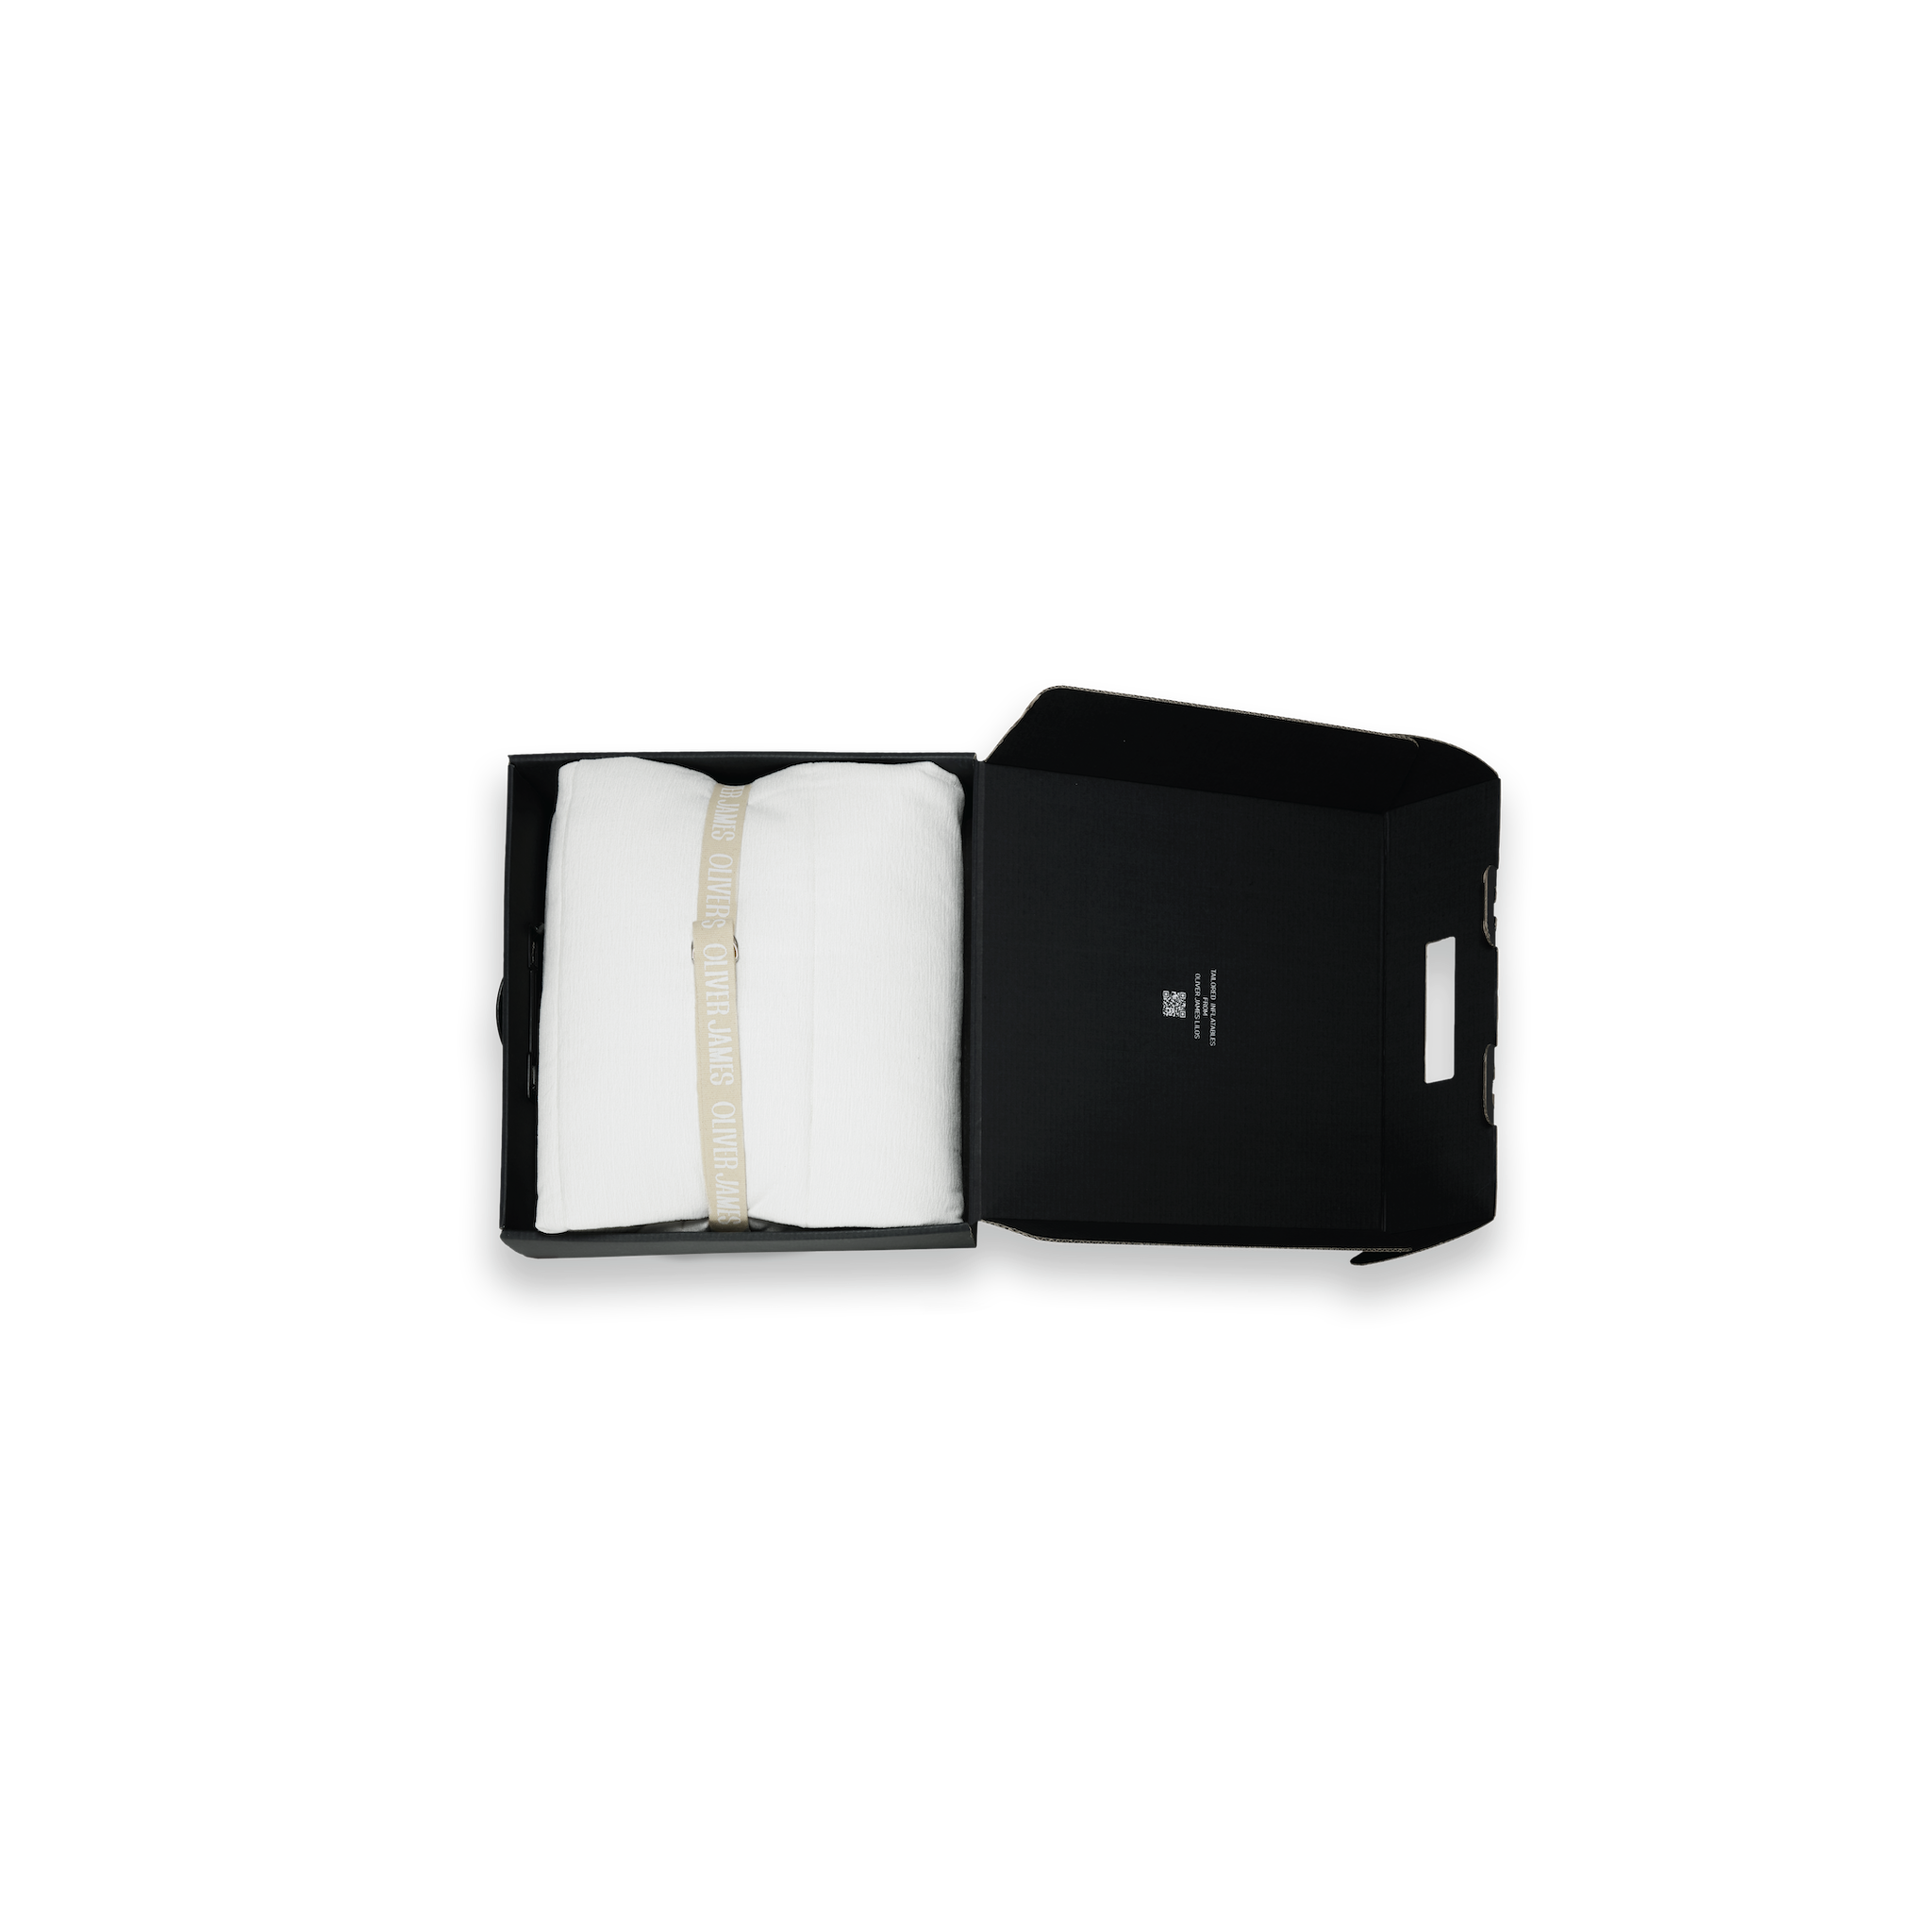 A double white terry toweled inflatable luxury pool float lounger cover folded in black box box with a belt, card and pump.